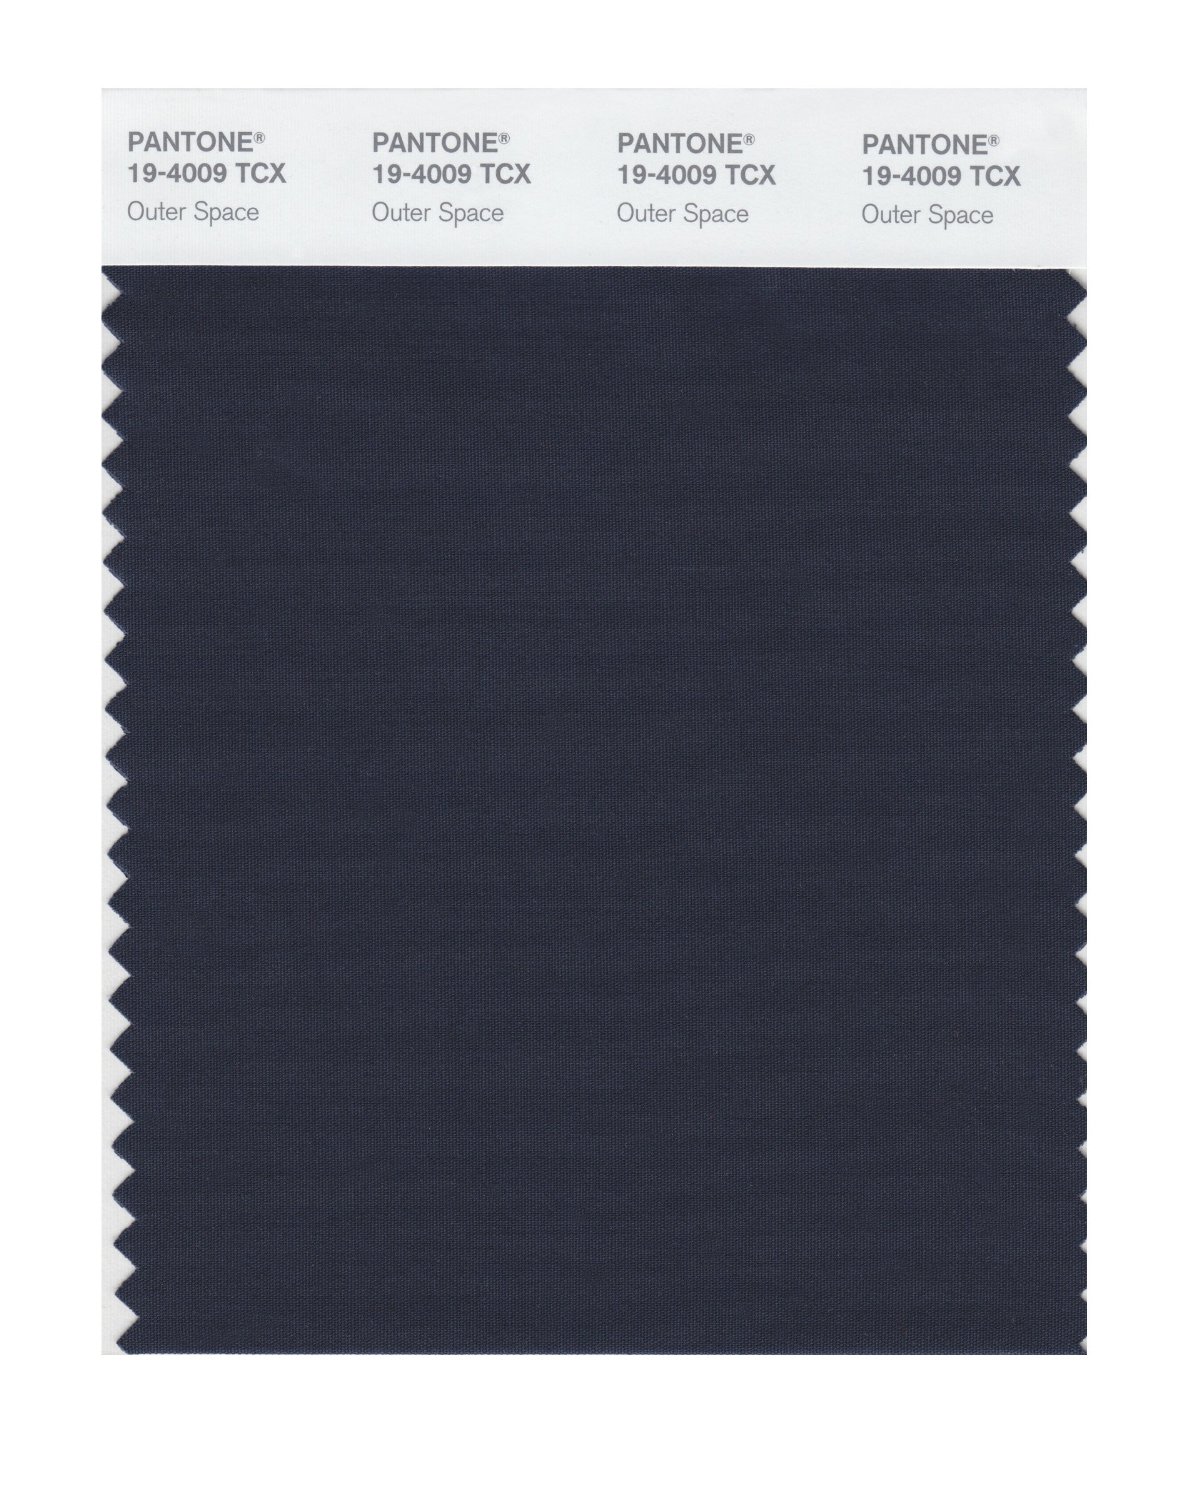 Pantone Cotton Swatch 19-4009 Outer Space